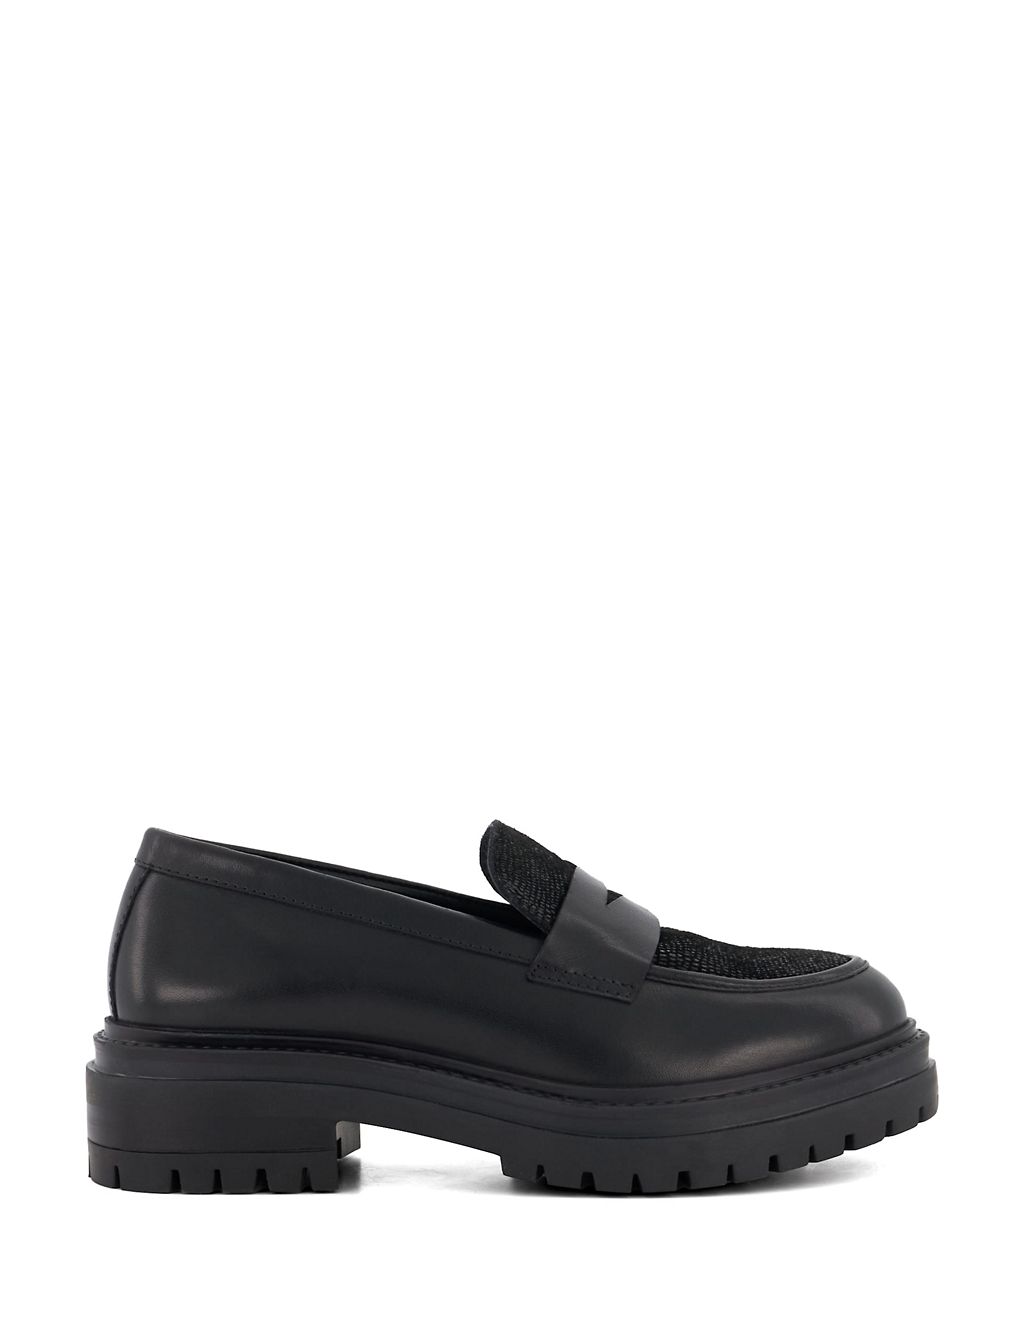 Leather Chunky Flatform Loafers | Dune London | M&S